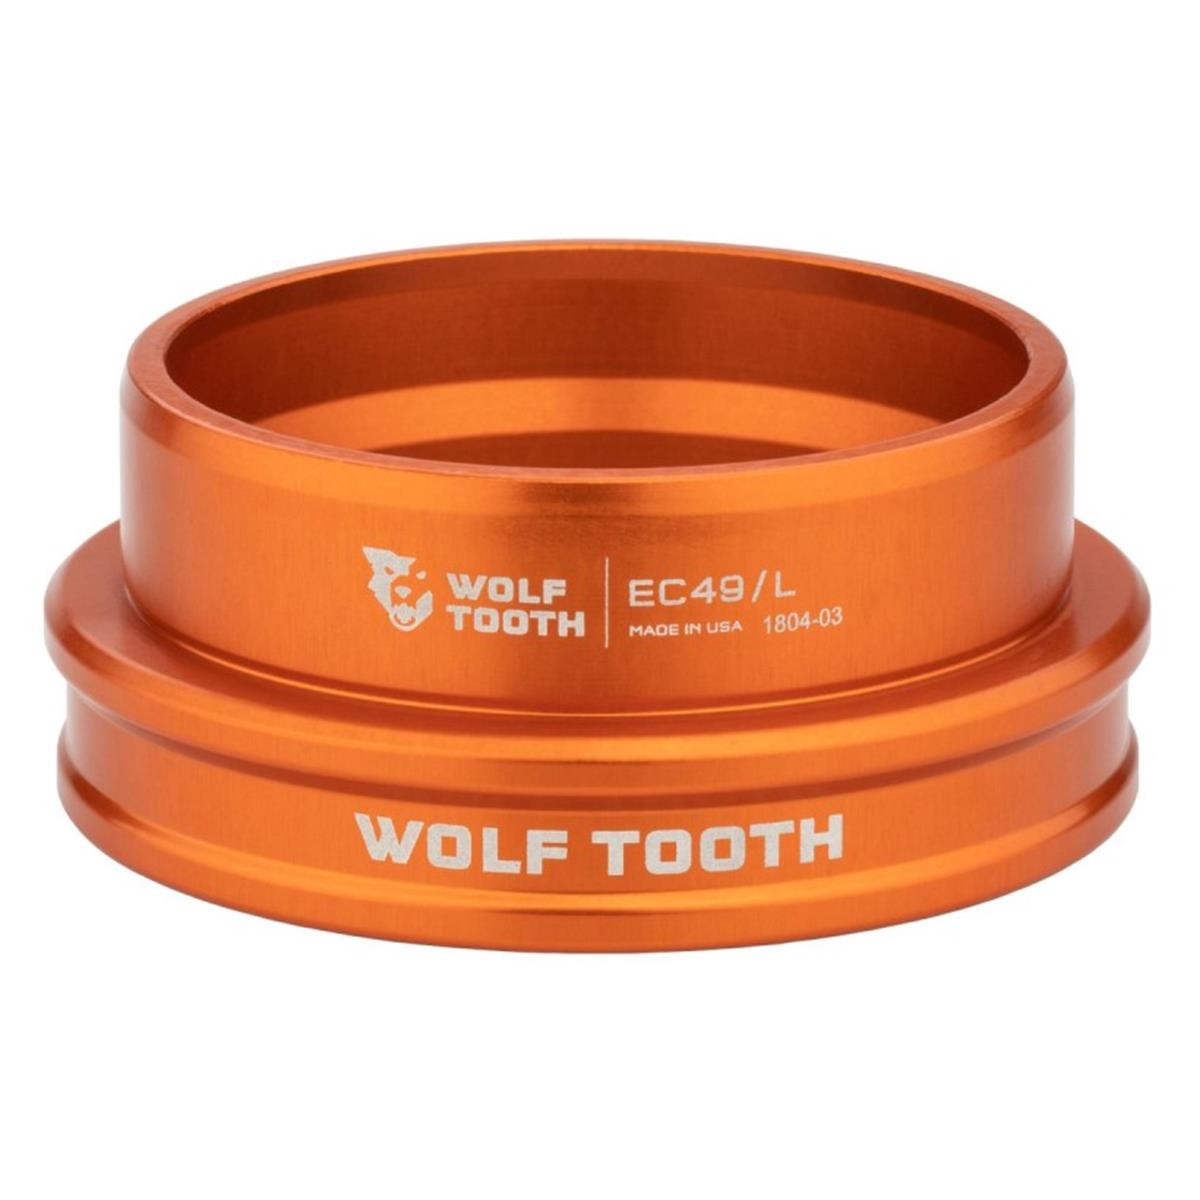 Serie Sterzo wolf tooth Direccion Inferior Ext Ec49/40